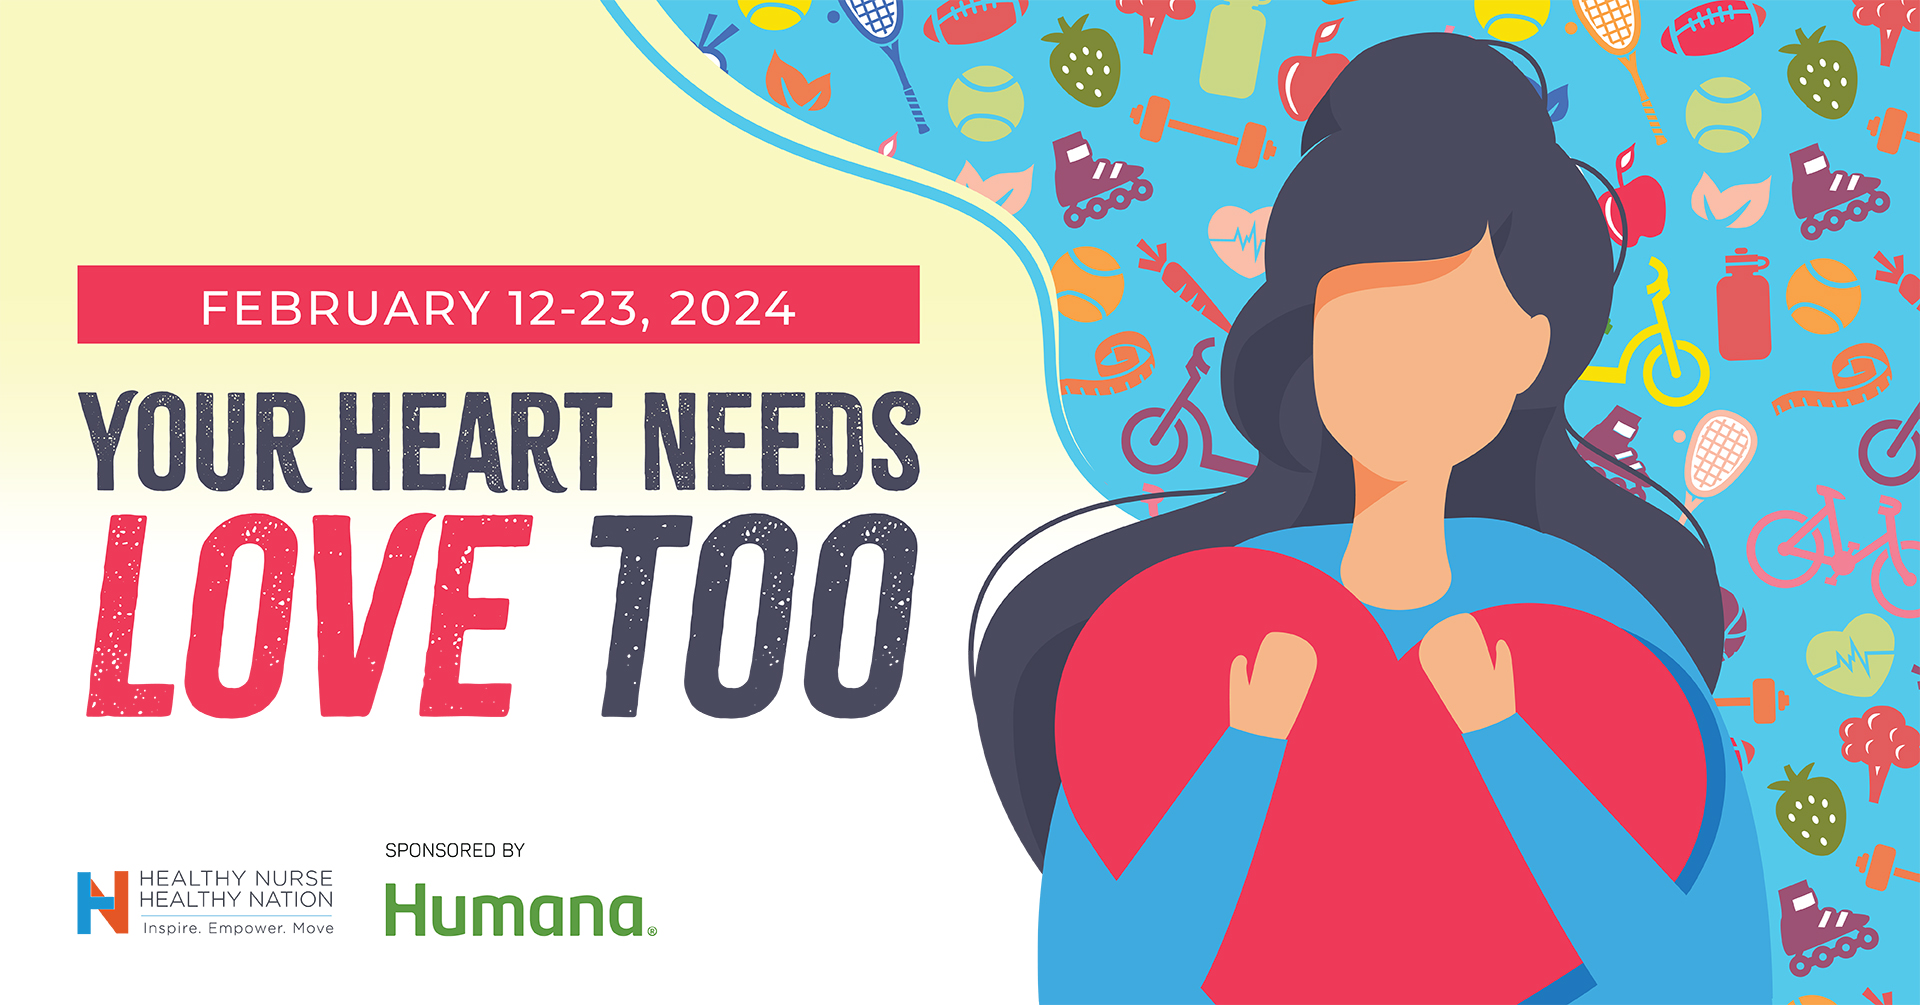 Take a Cardio Stroll - Healthy Nurse, Healthy Nation - Your Heart Needs Love Too Challenge, sponsored by Humana - Day 2 4663